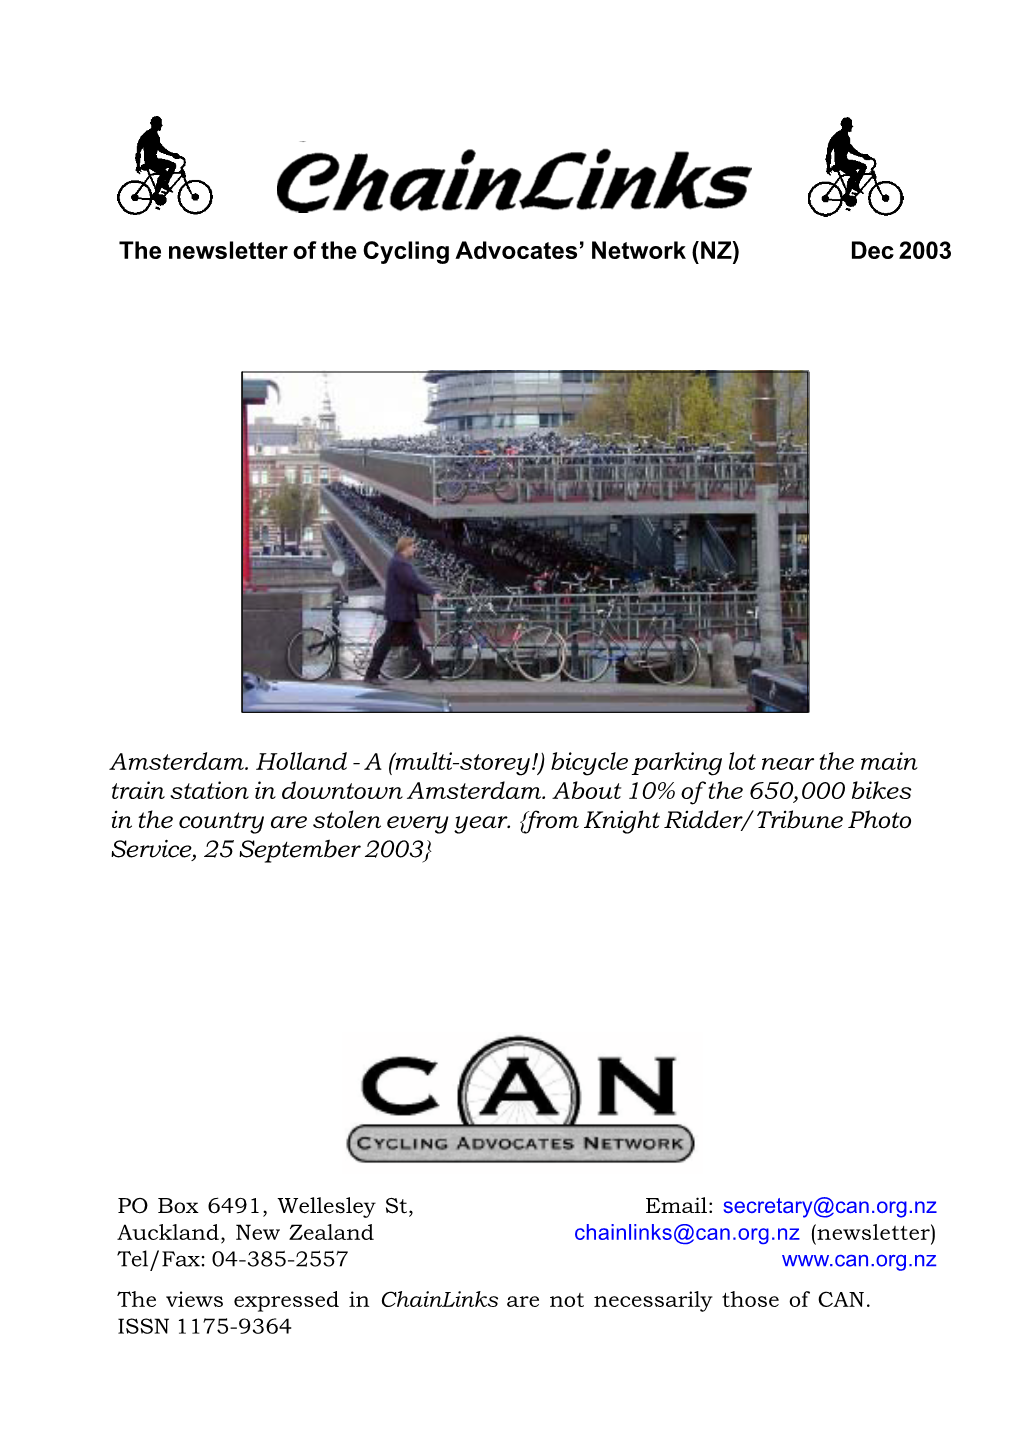 The Newsletter of the Cycling Advocates' Network (NZ) Dec 2003